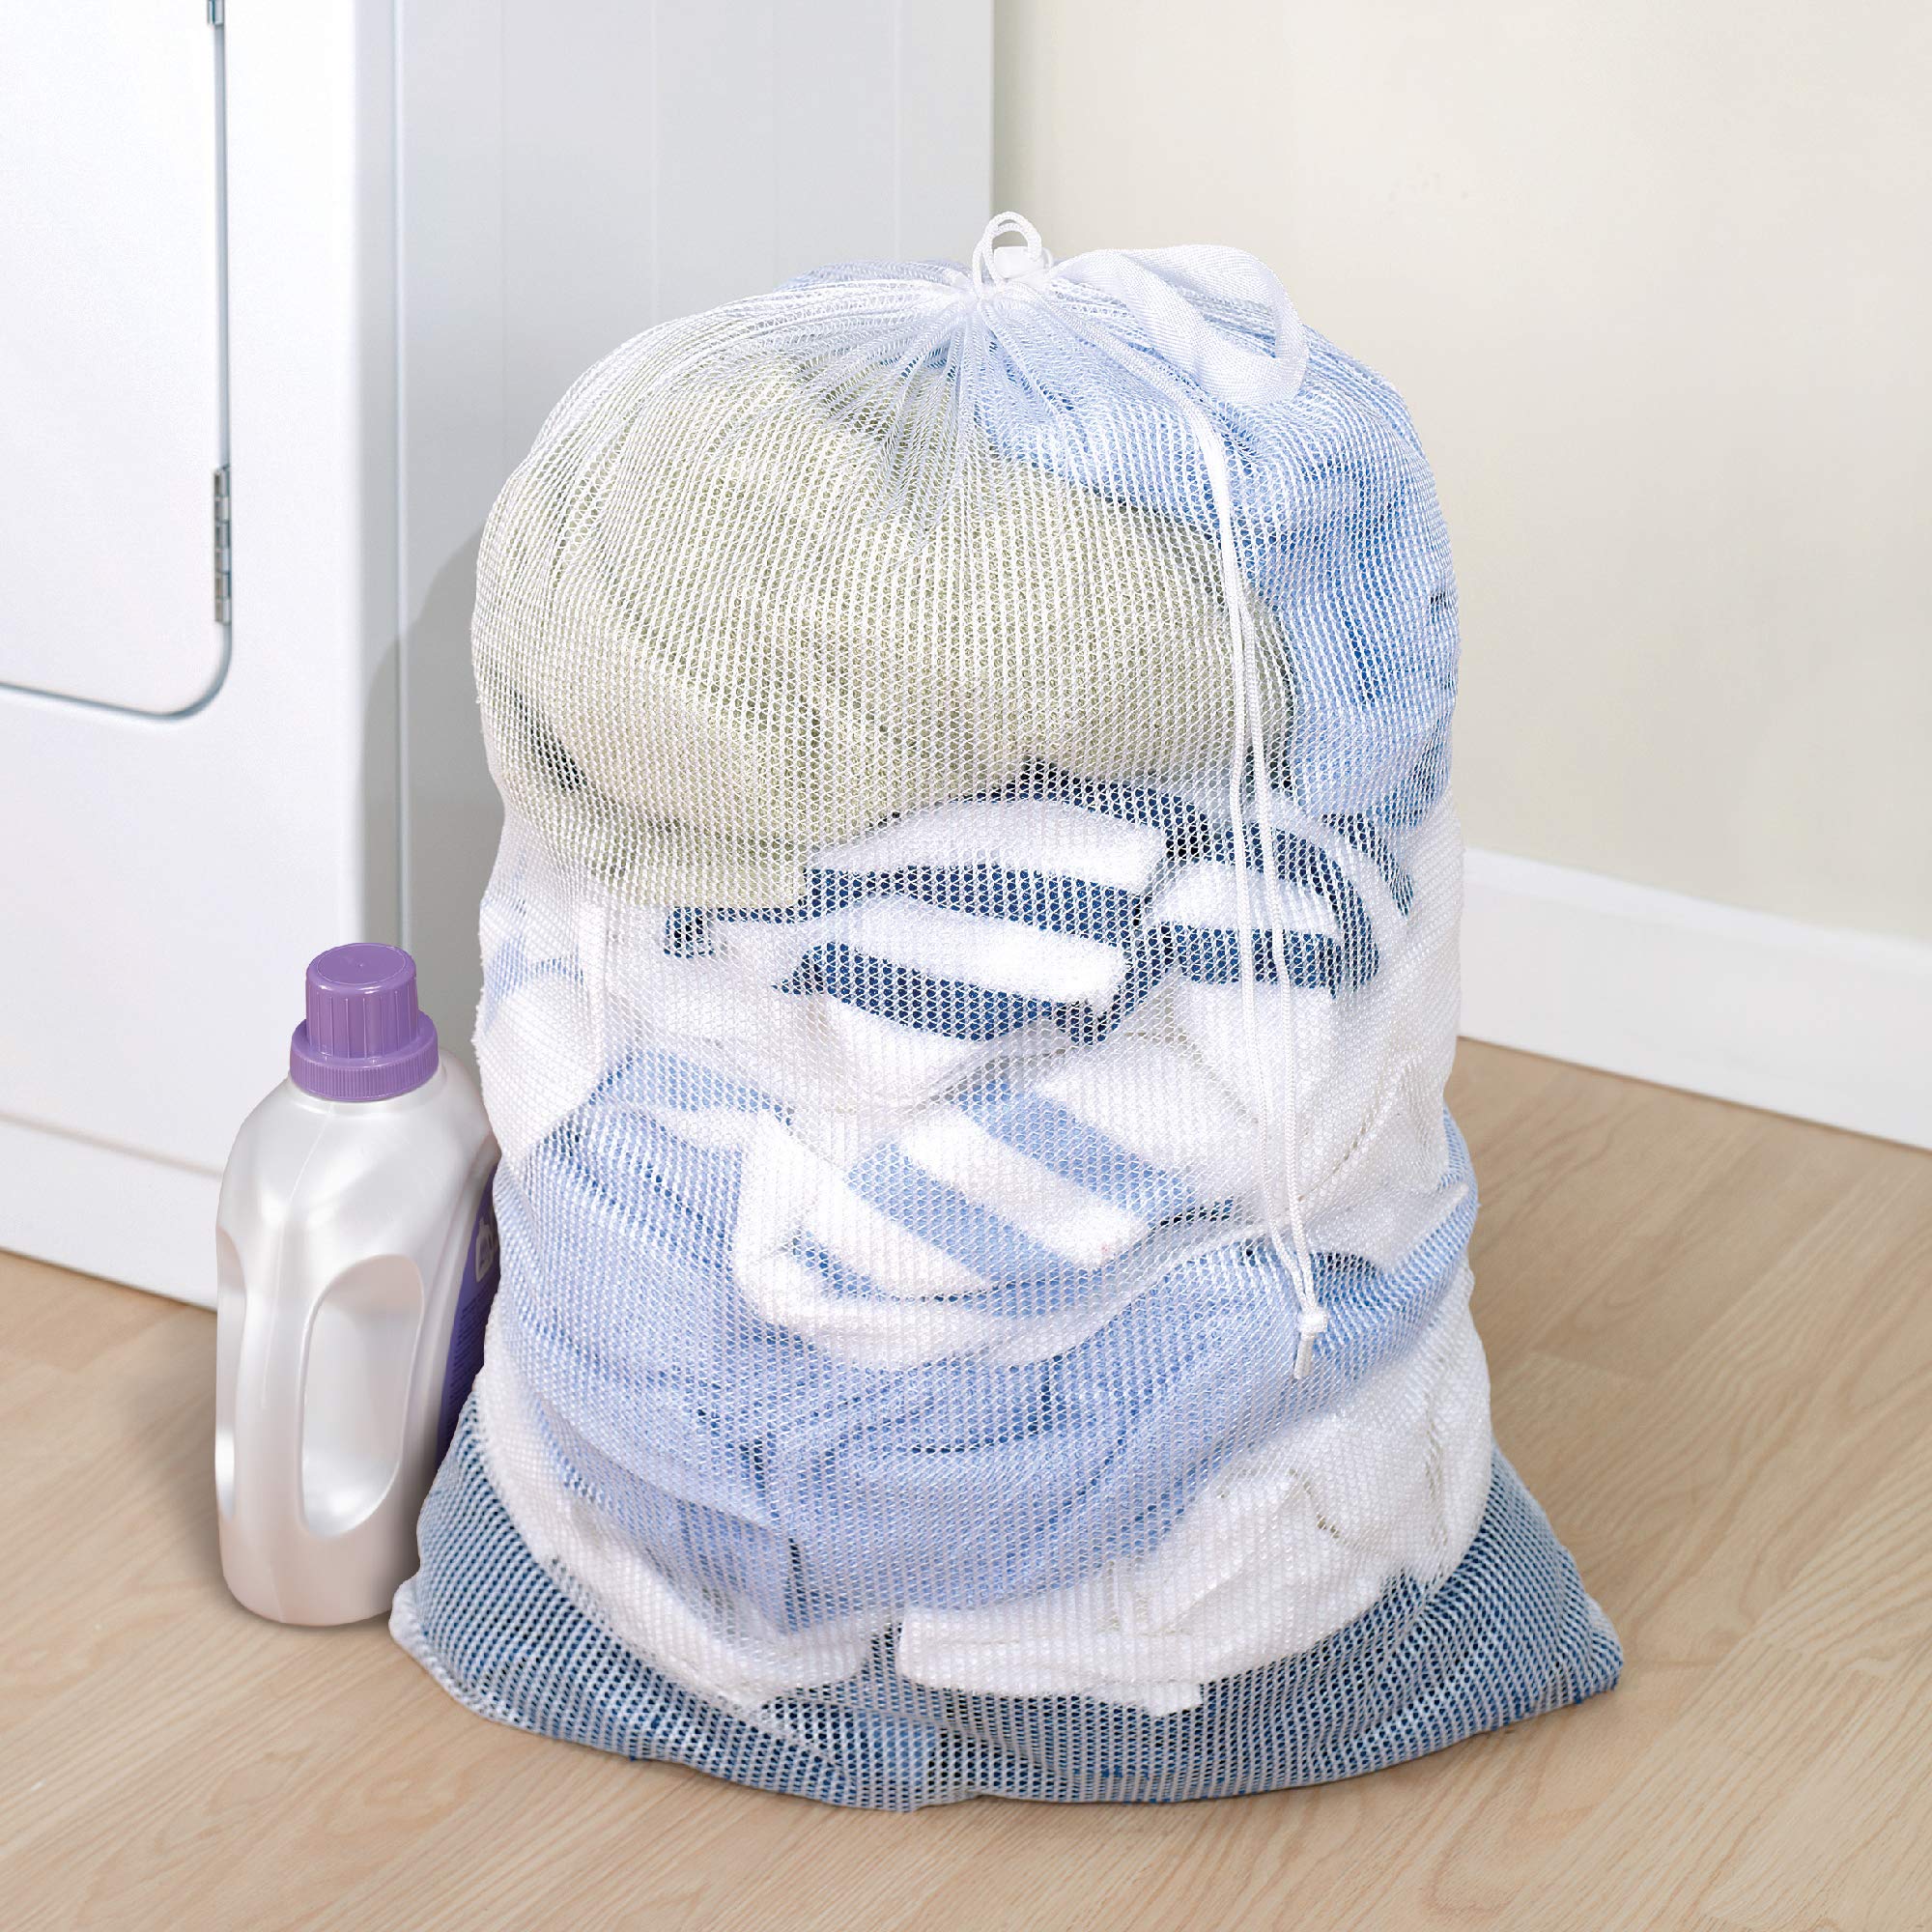 Mesh Laundry Bag with Handle and Push Lock Drawstring - Multiple Options - Smart Design® 9